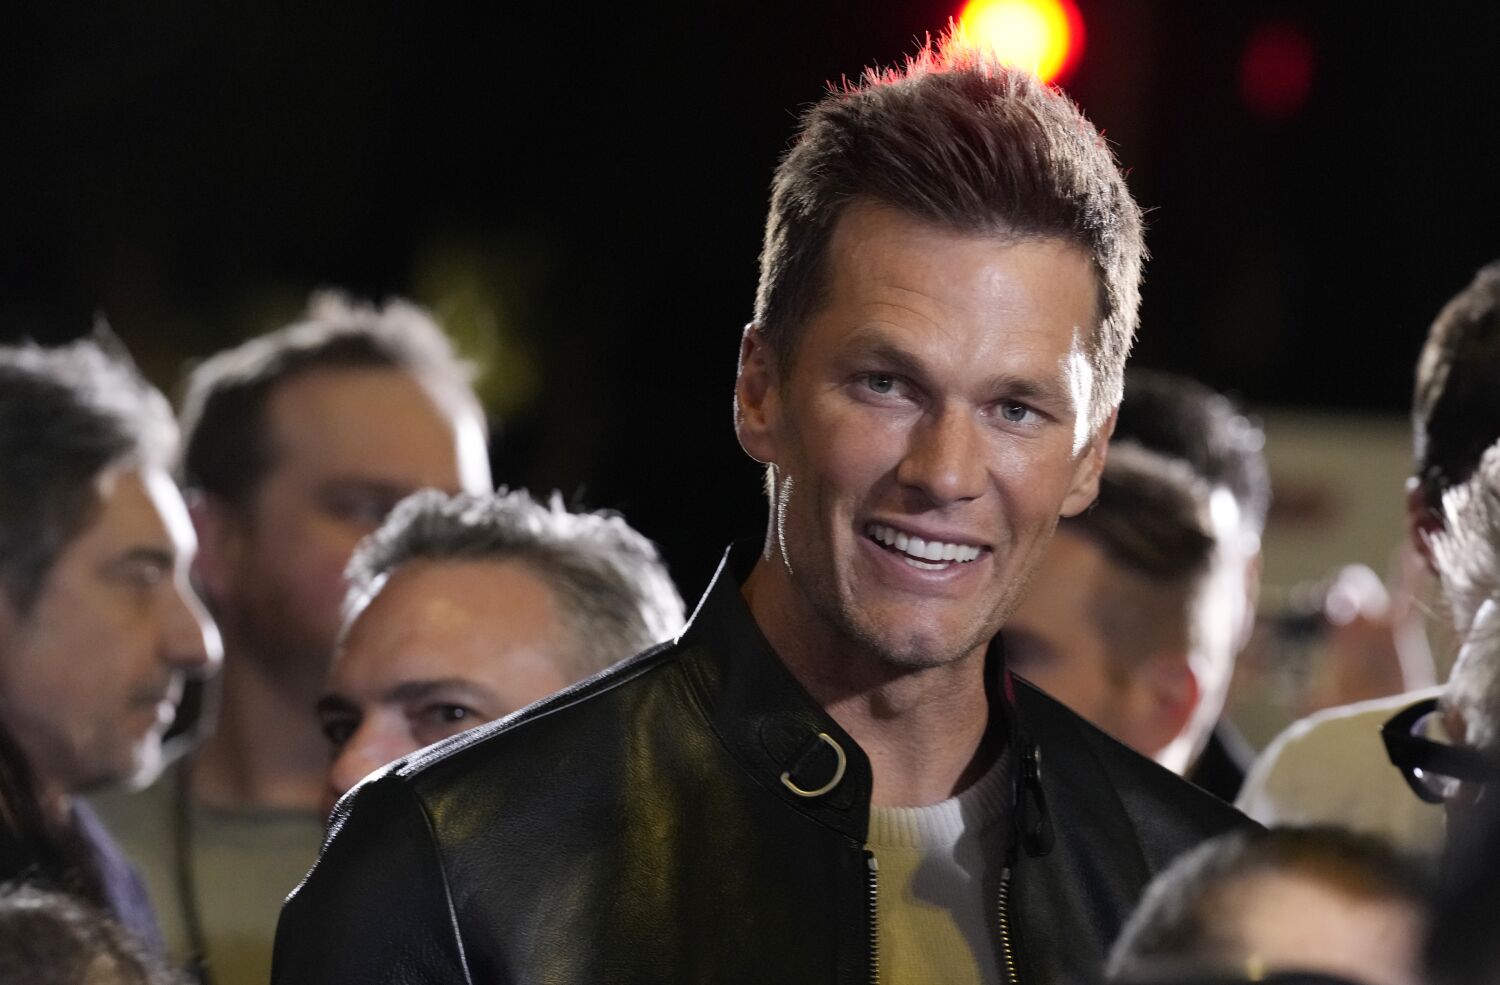 Tom Brady insists he's done playing football. Can't imagine why no one believes him